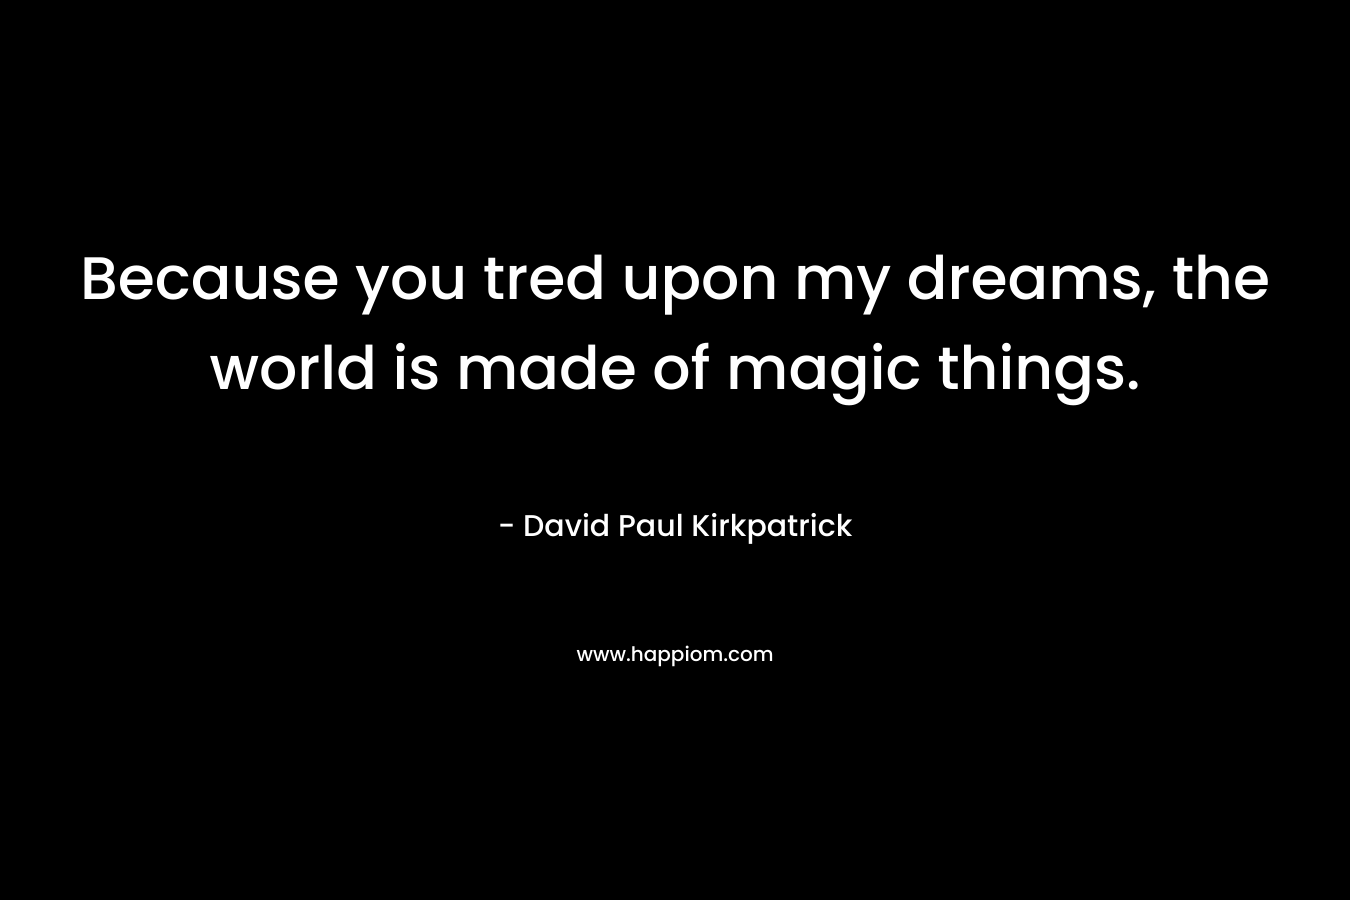 Because you tred upon my dreams, the world is made of magic things. – David Paul Kirkpatrick